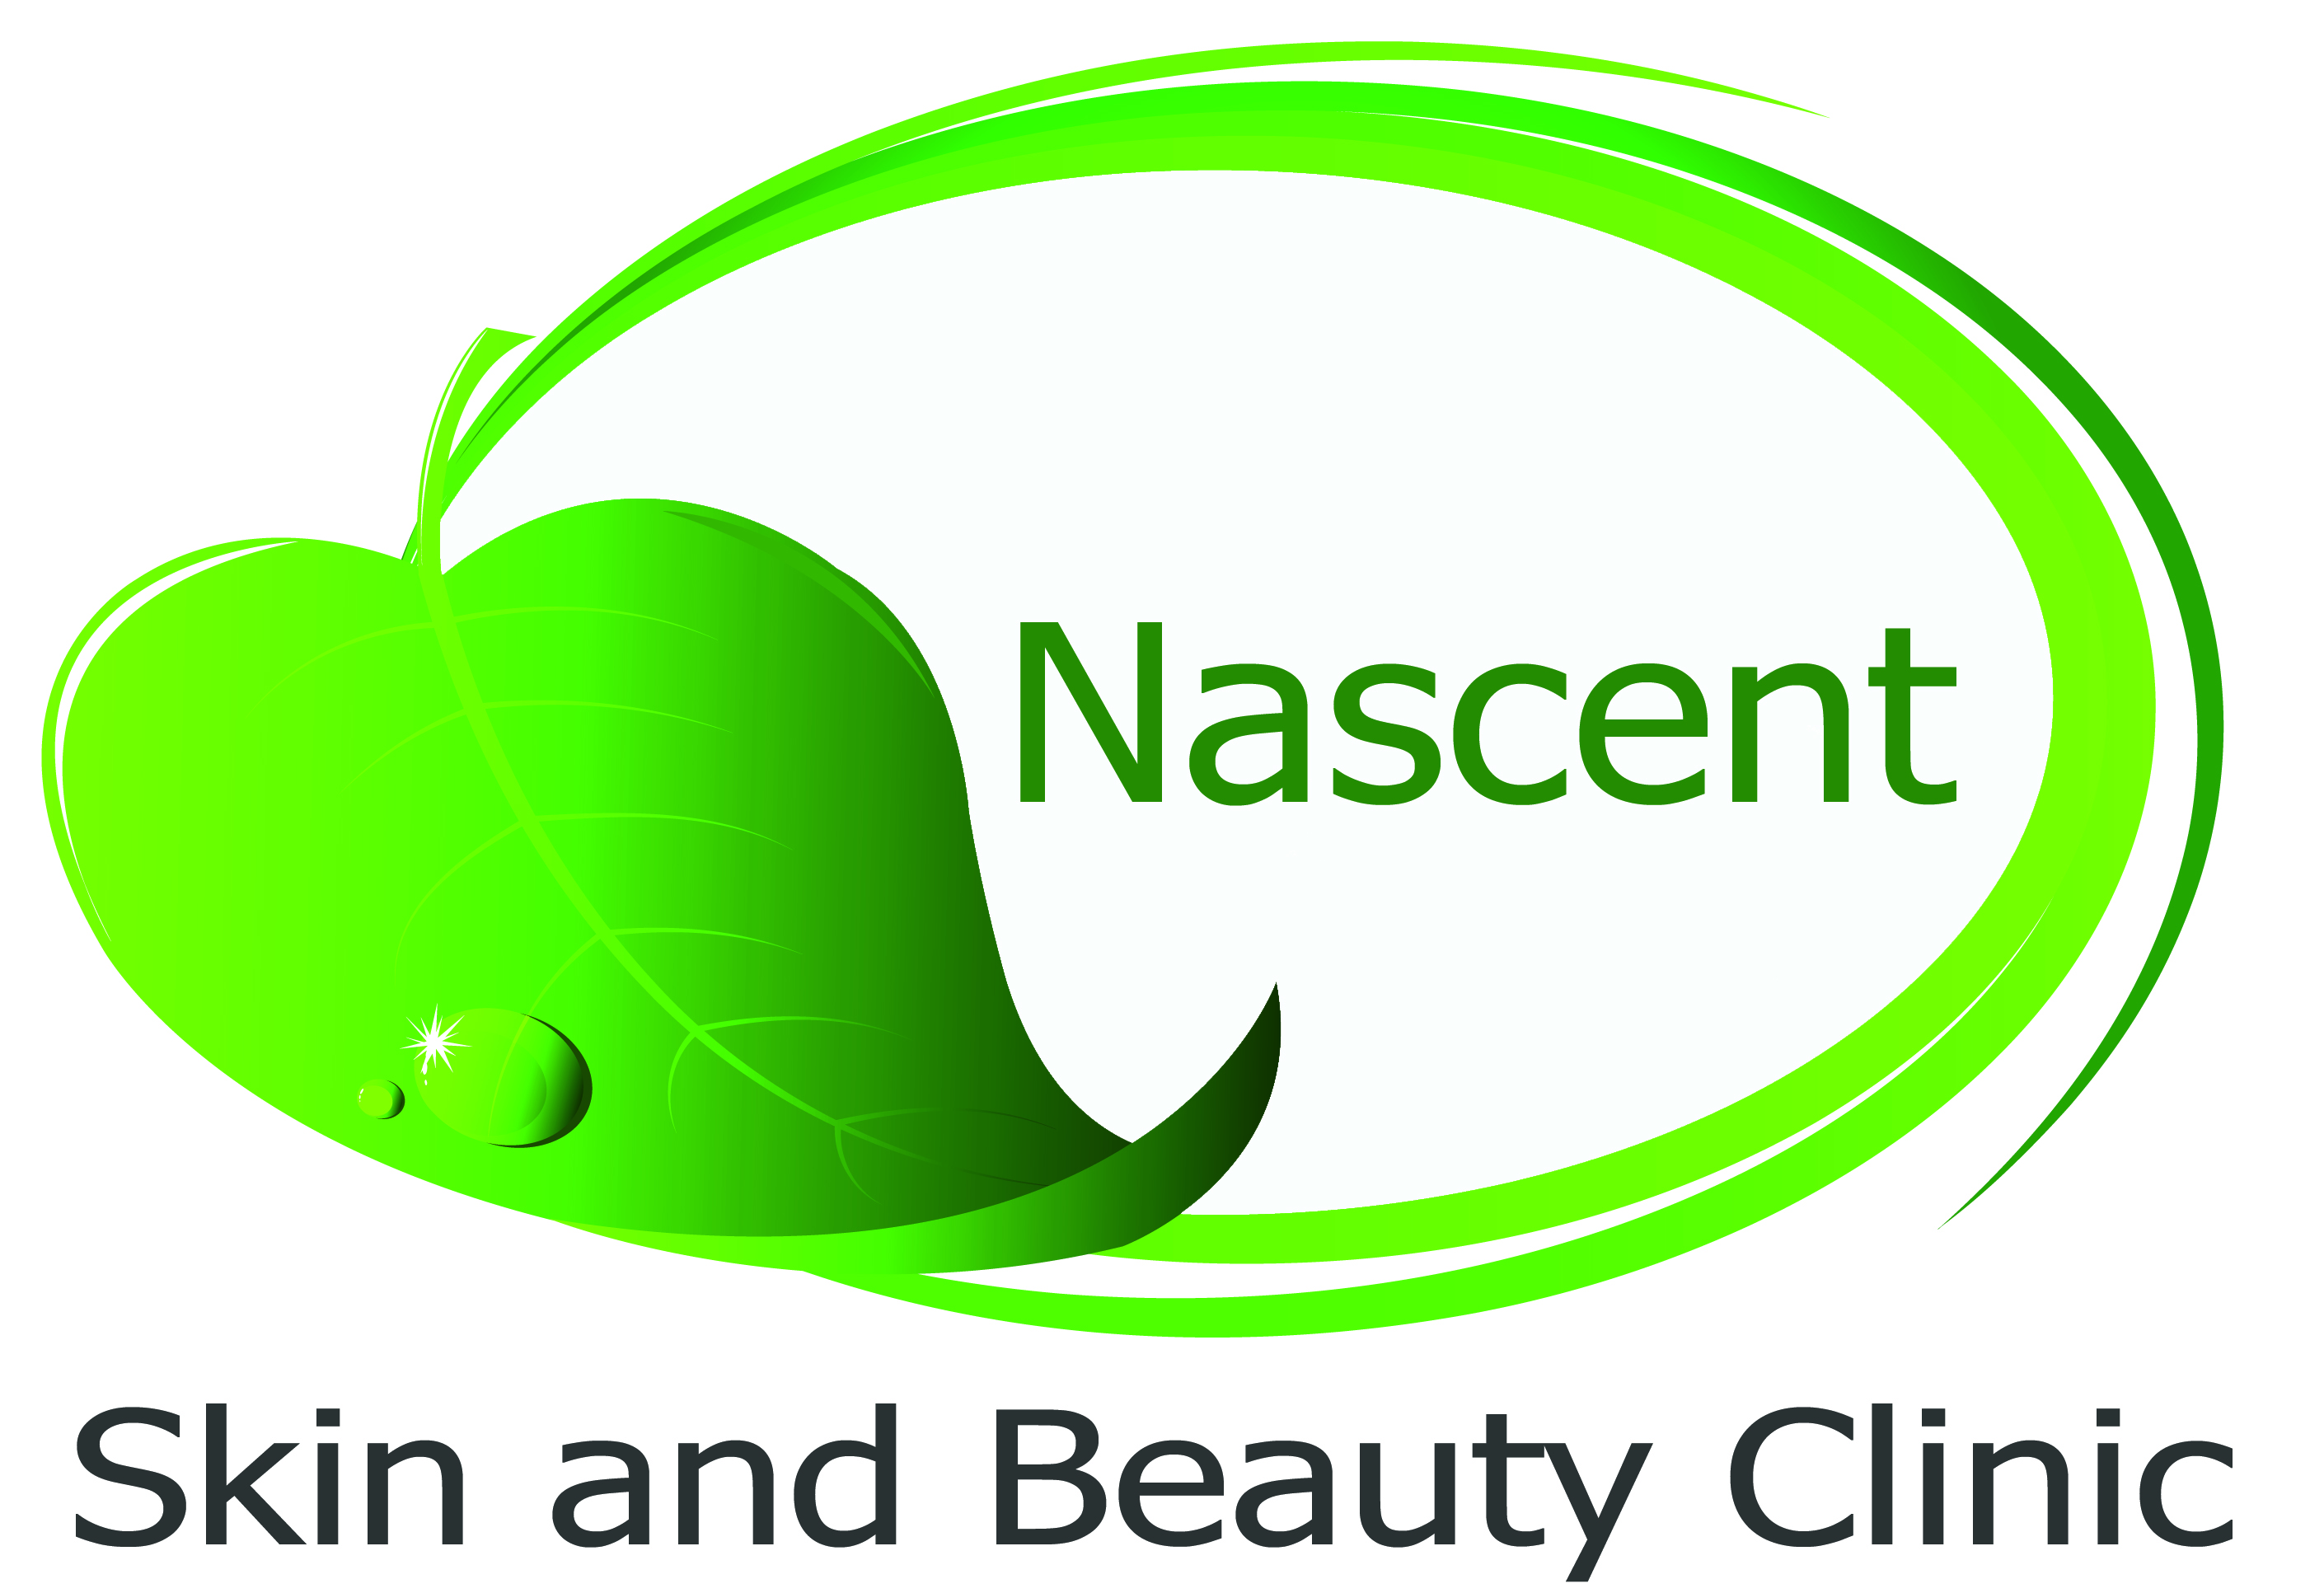 Nascent Skin and Beauty Clinic